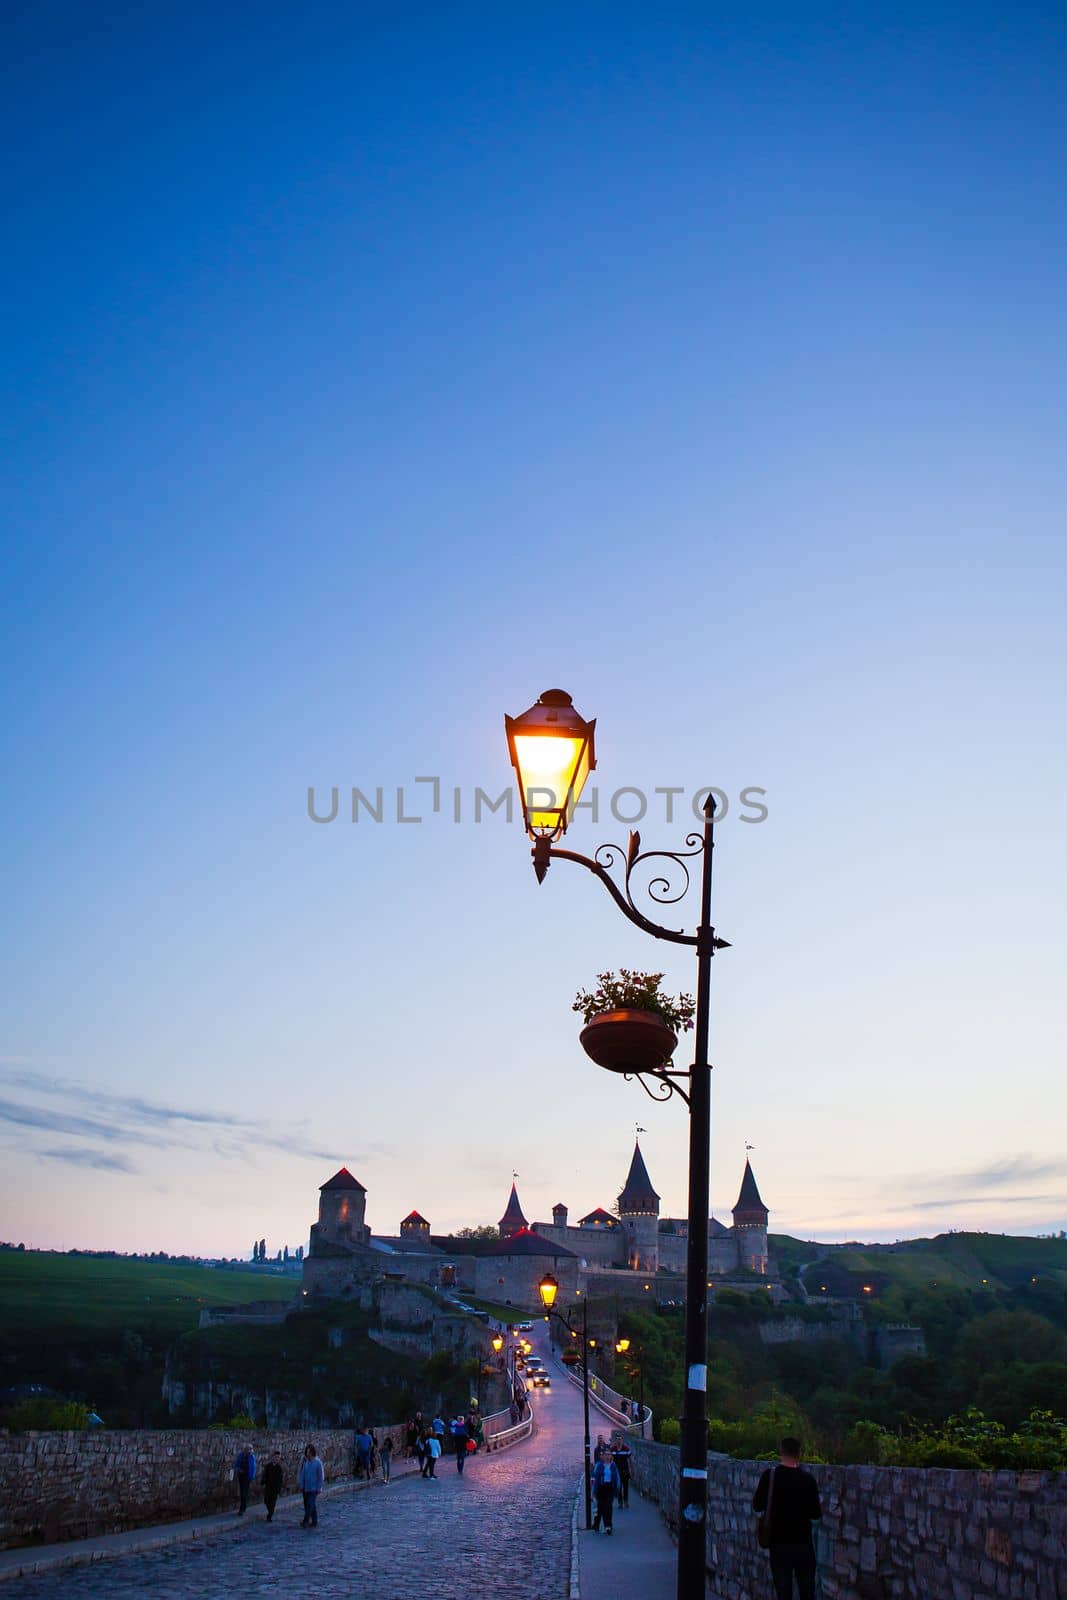 Kamianets-Podilskyi is a romantic city, a beautiful view of the evening city, lanterns illuminate the bridge, lantern close-up. A picturesque summer view of the ancient castle-fortress in Kamianets-Podilskyi, Khmelnytskyi region, Ukraine